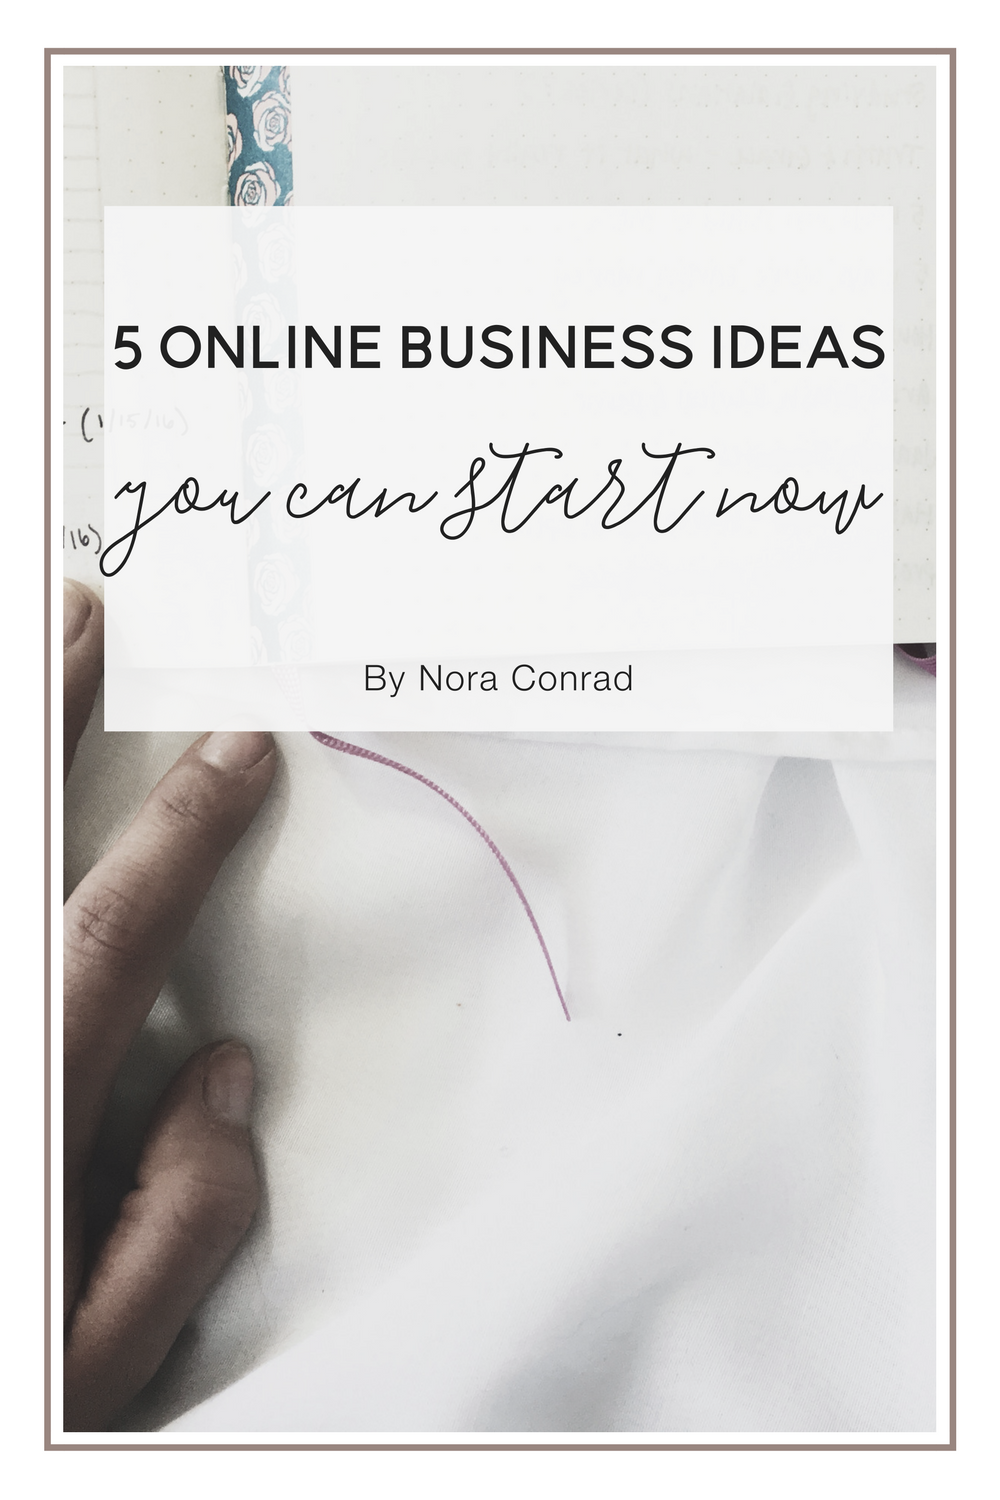 5 ways to make money online that anyone can do. Broken down into 5 categories and then details and ideas under each. Online business ideas made simple.